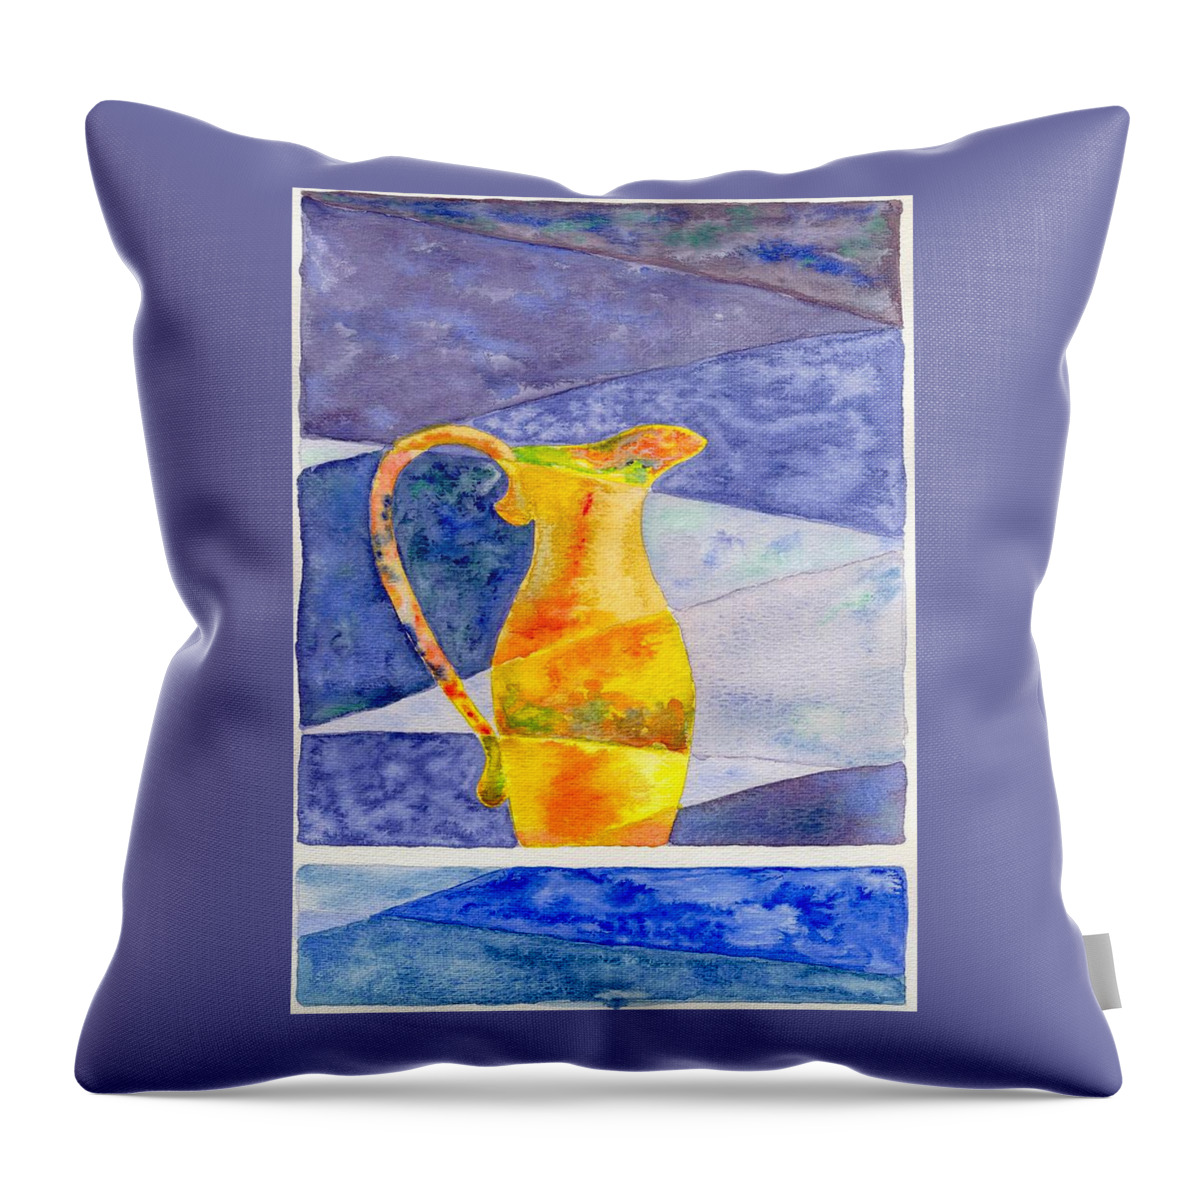 Still Life Throw Pillow featuring the painting Pitcher 1 by Micah Guenther